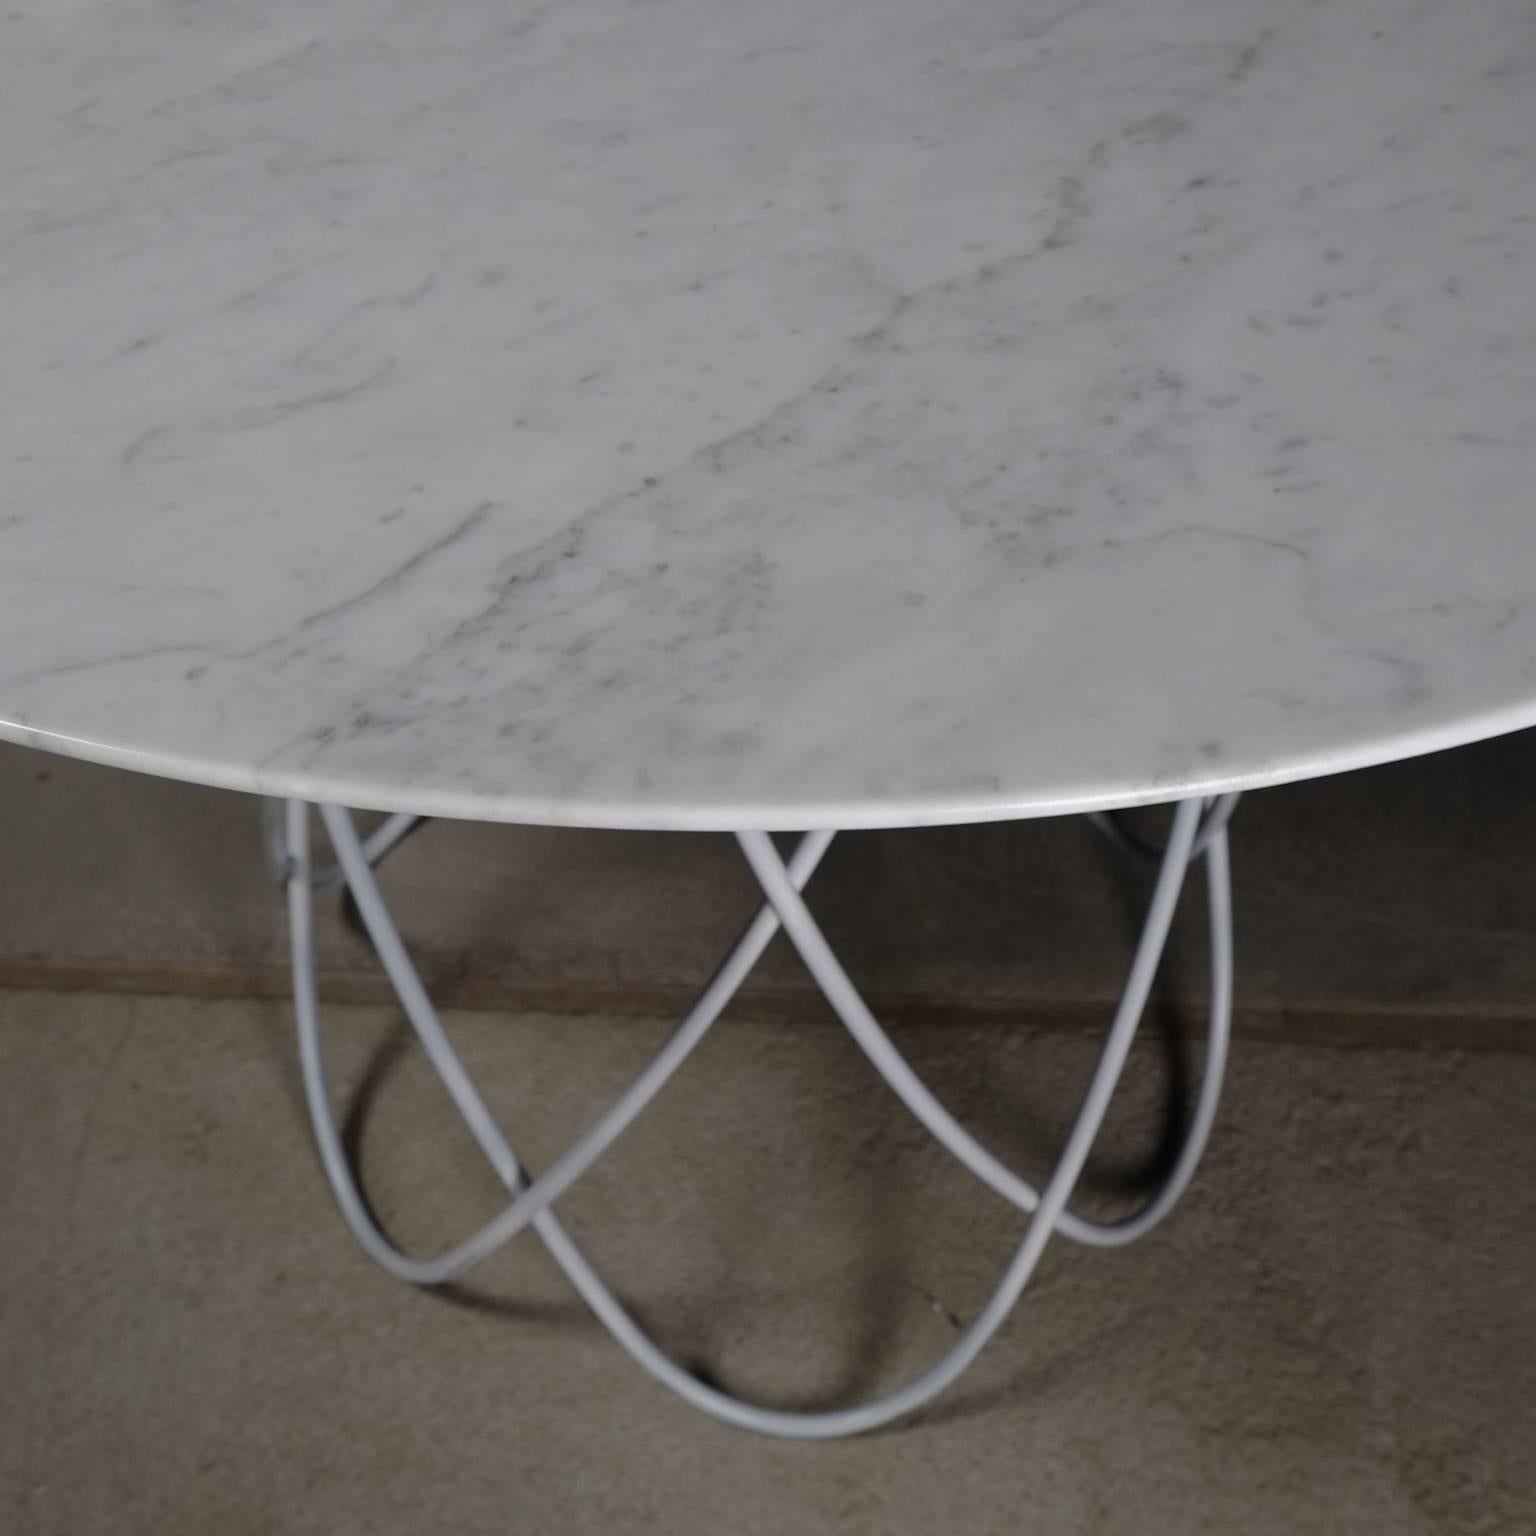 Marble is immensely rich material loaded with symbolic value.
The challenge for feather table is to explore the limitations of structural and poetic qualities of marble.